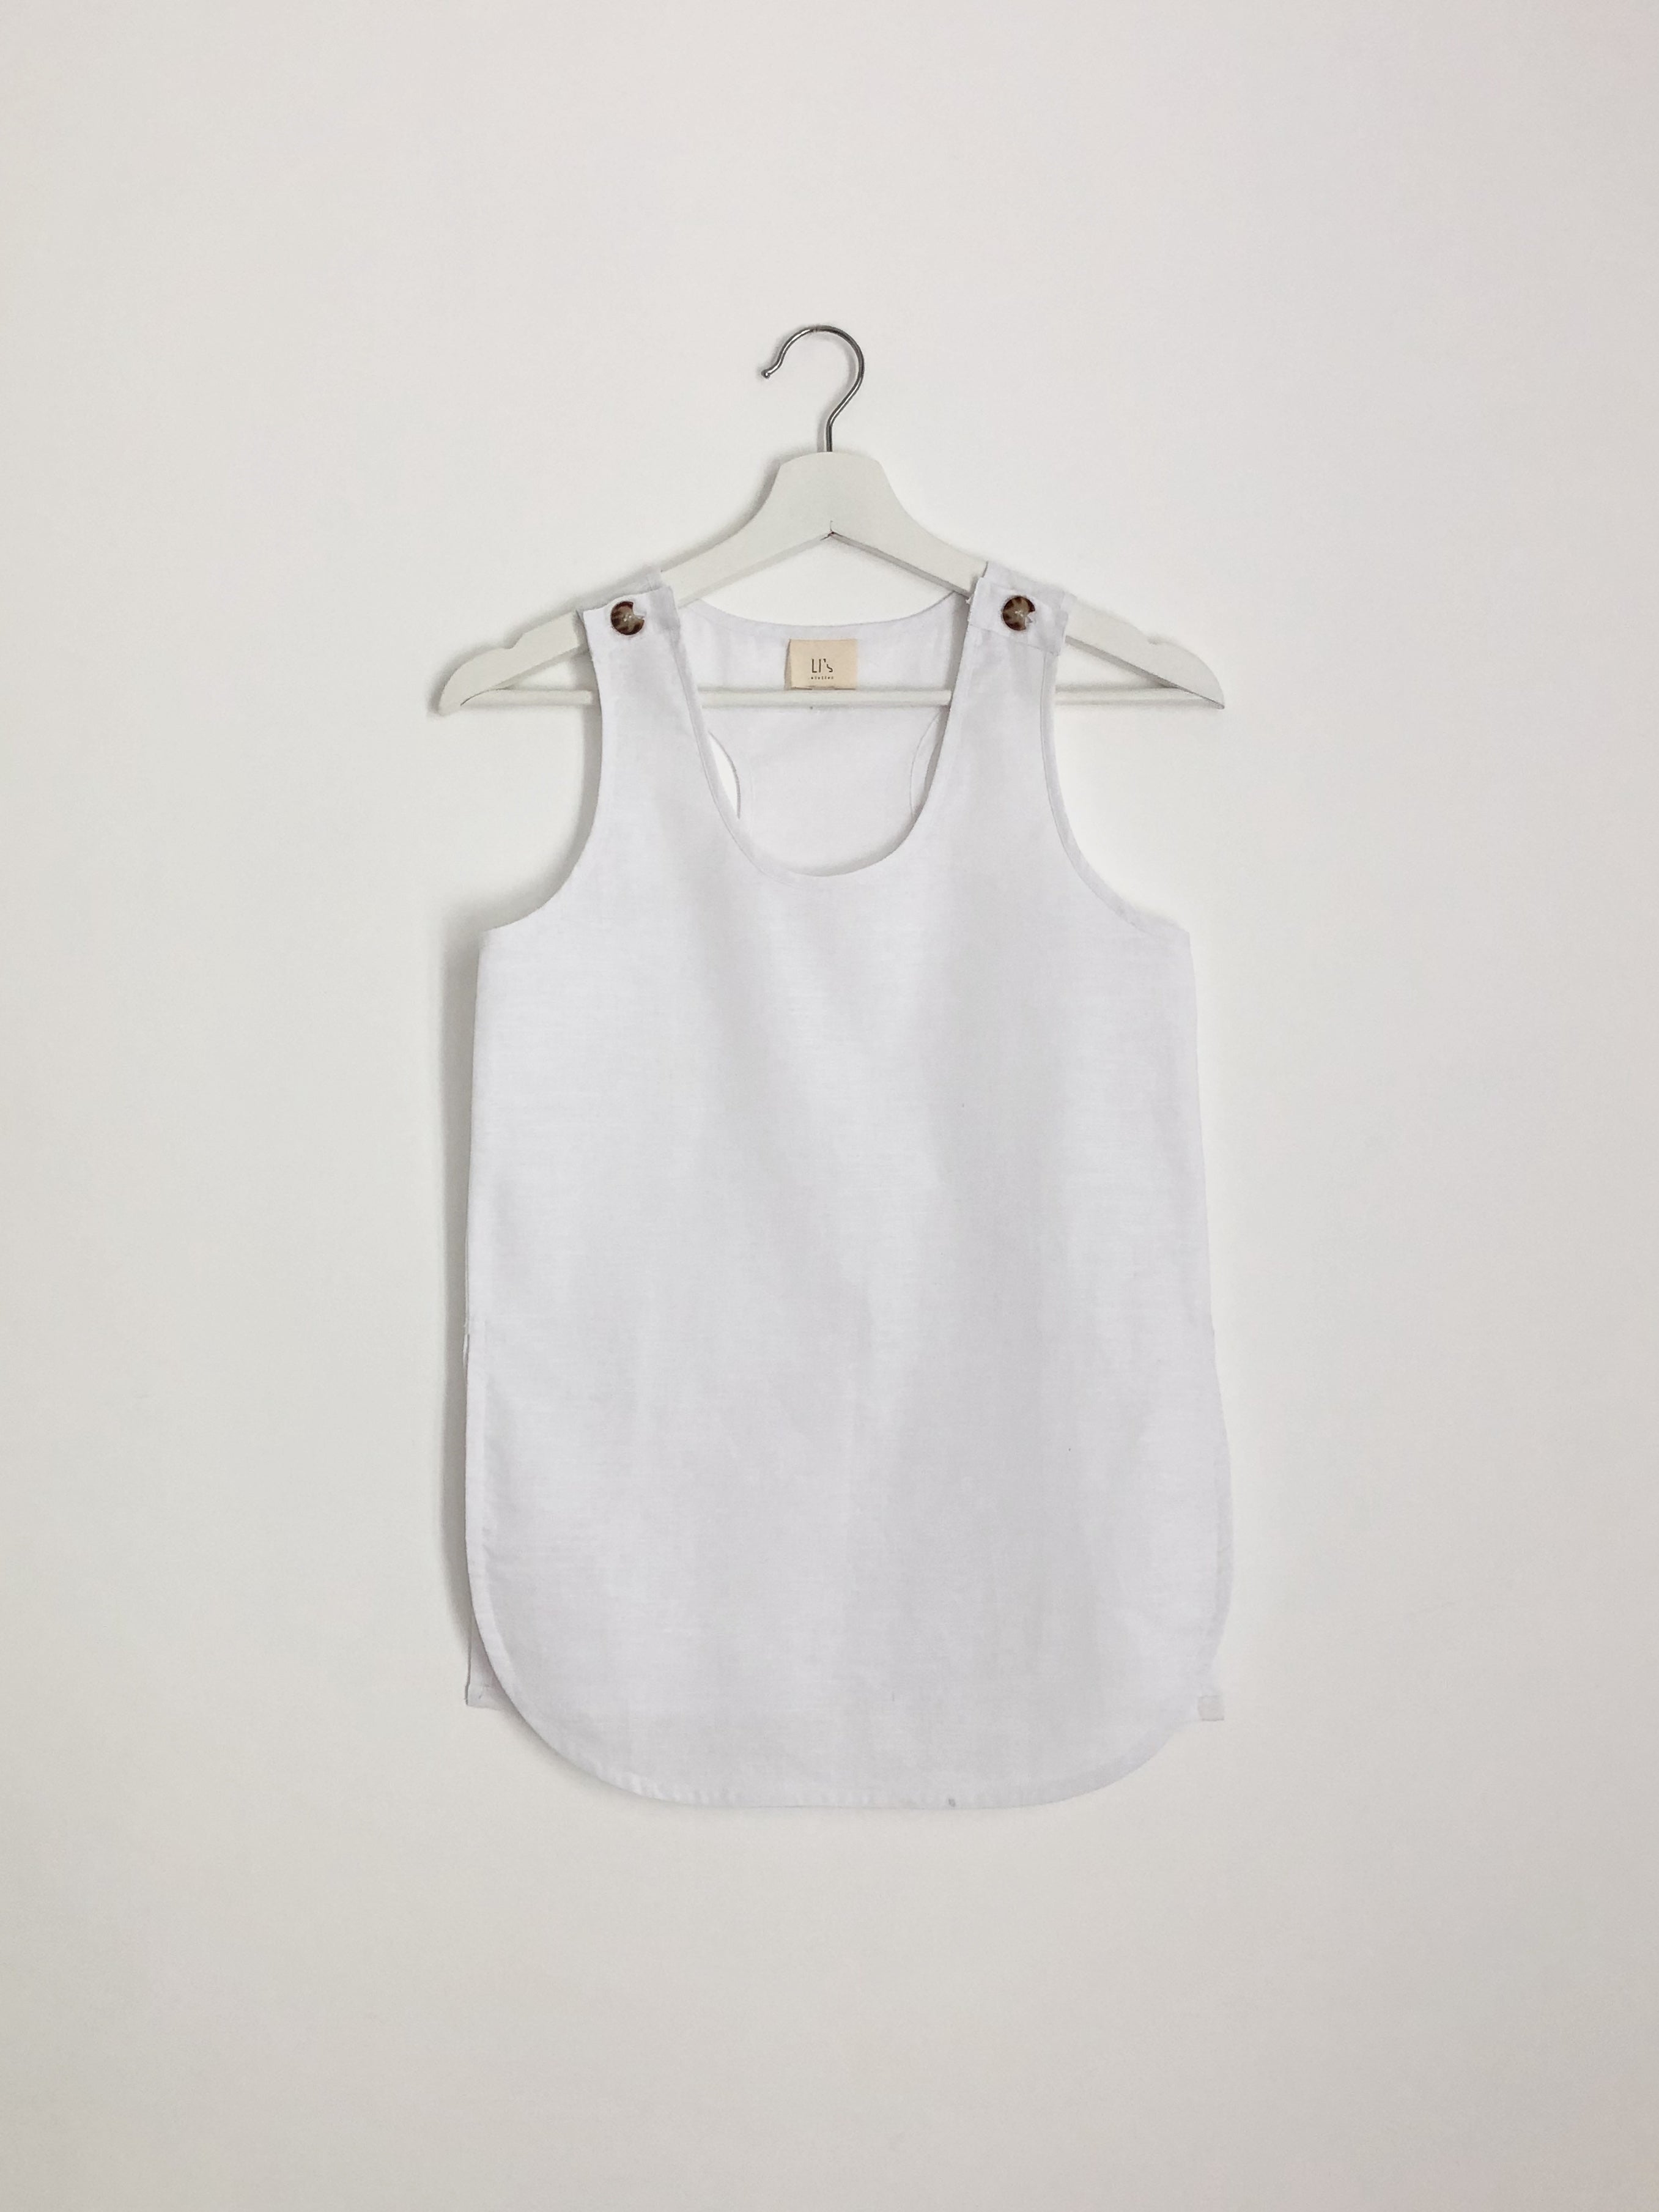 BUTTON TANK TOP in white